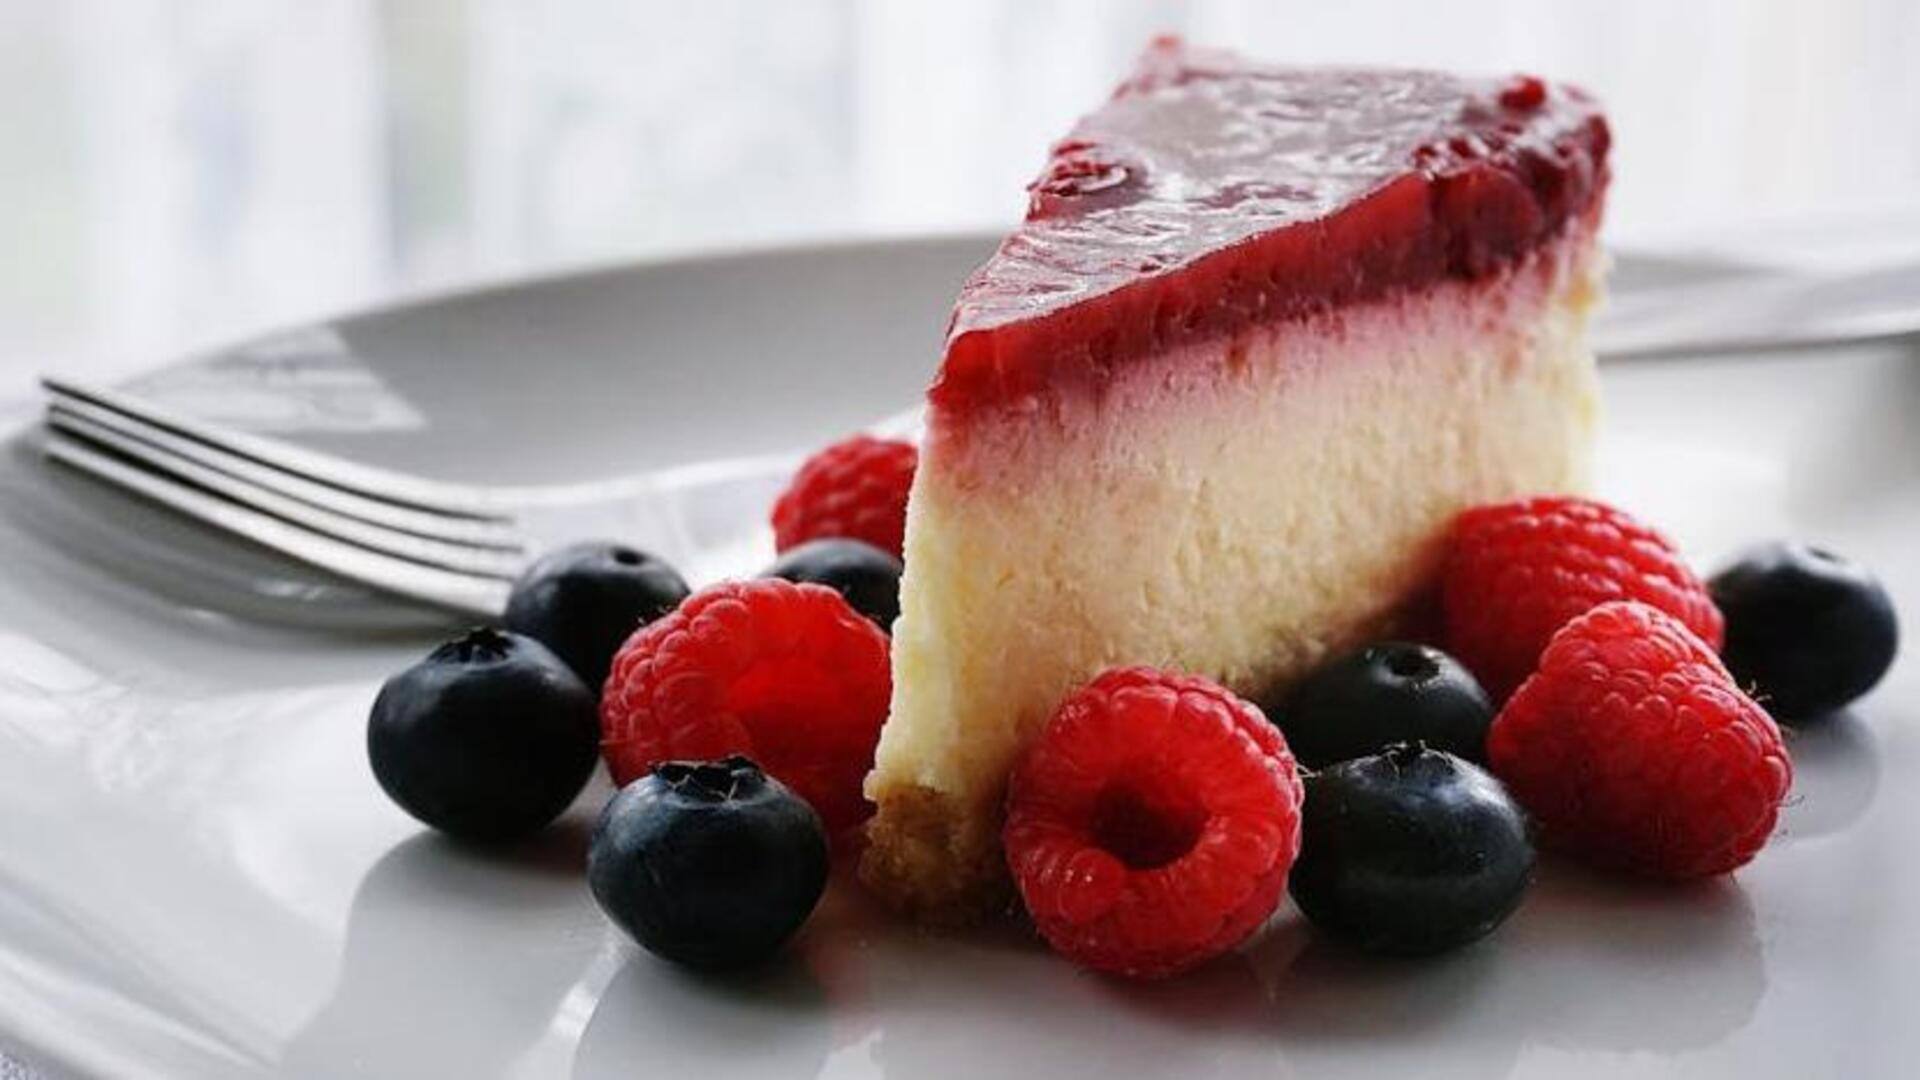 Indulge in these delicious dairy-free vegan cheesecake delights